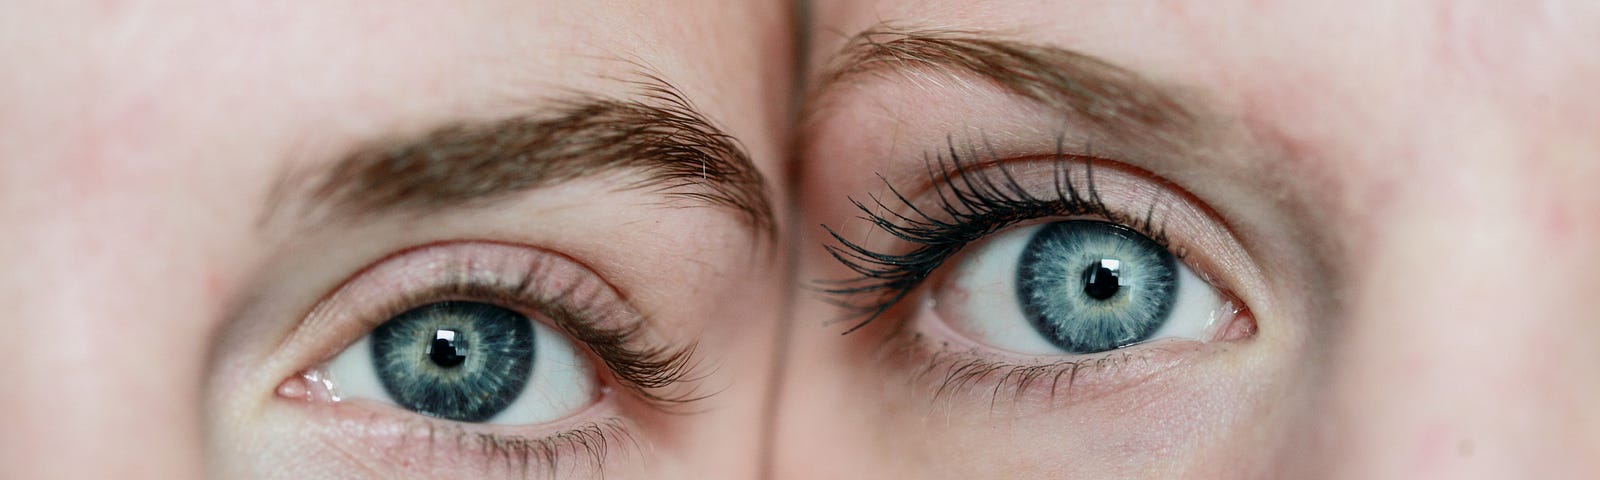 Faces of two women with green eyes next to each other.